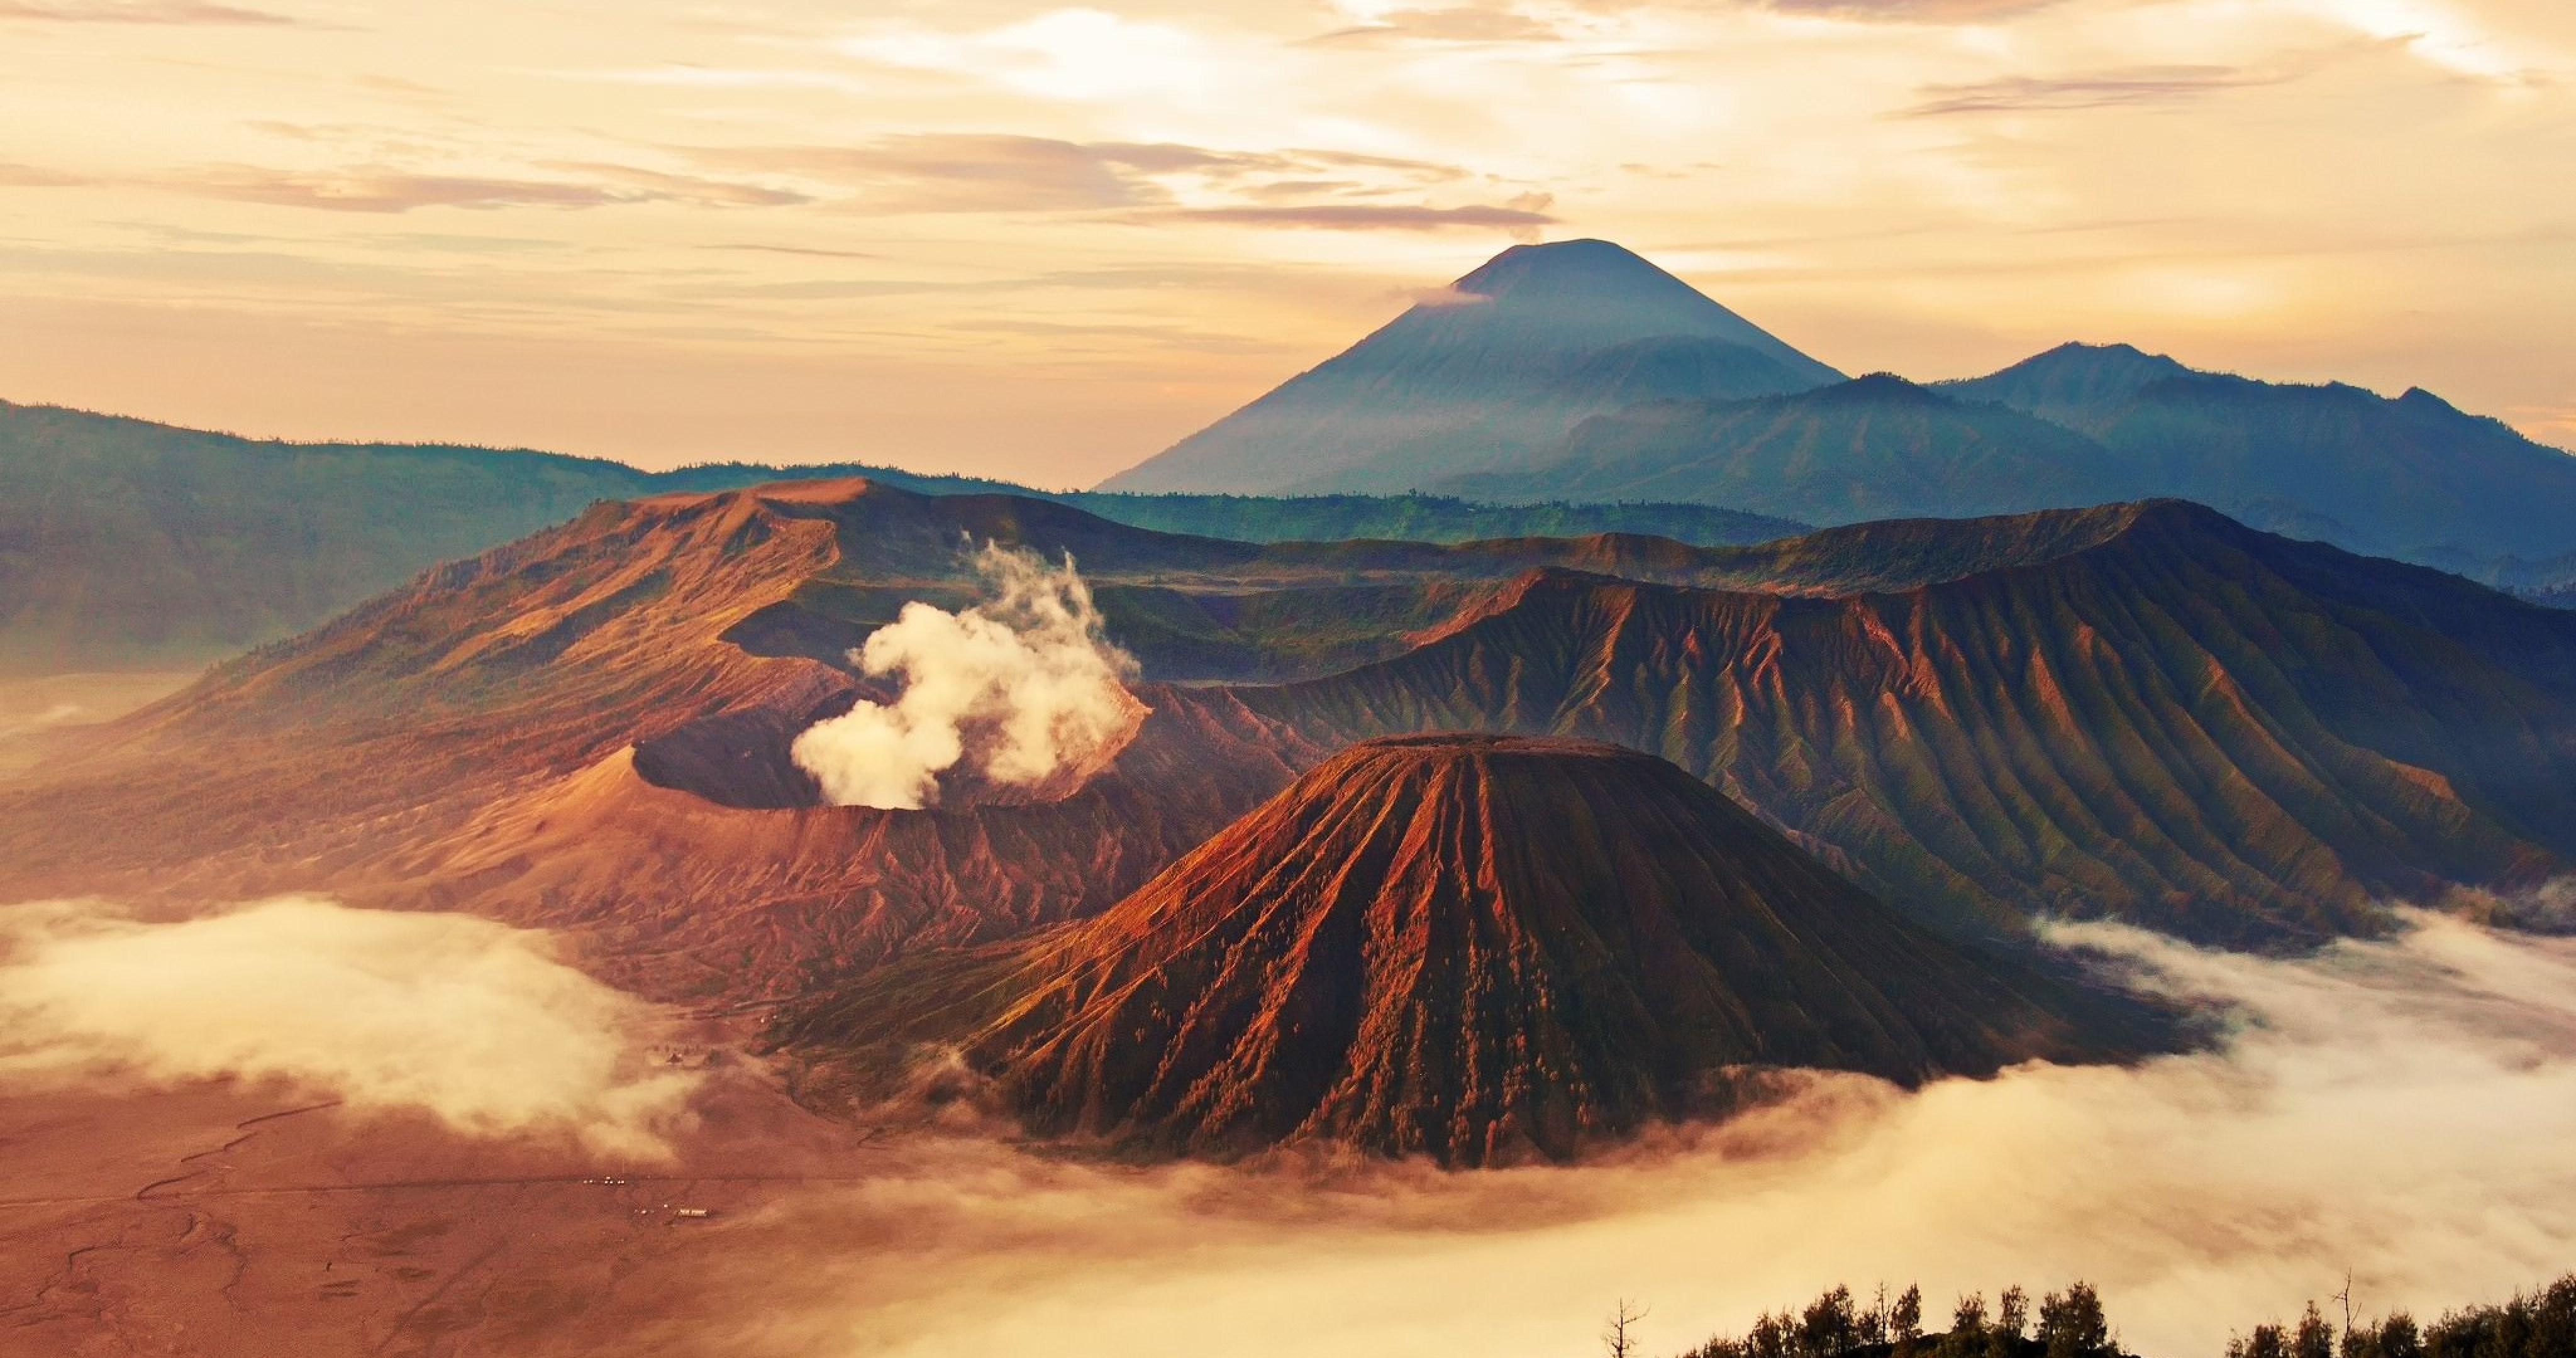 Indonesia 4K Wallpapers - Top Free Indonesia 4K Backgrounds - WallpaperAccess